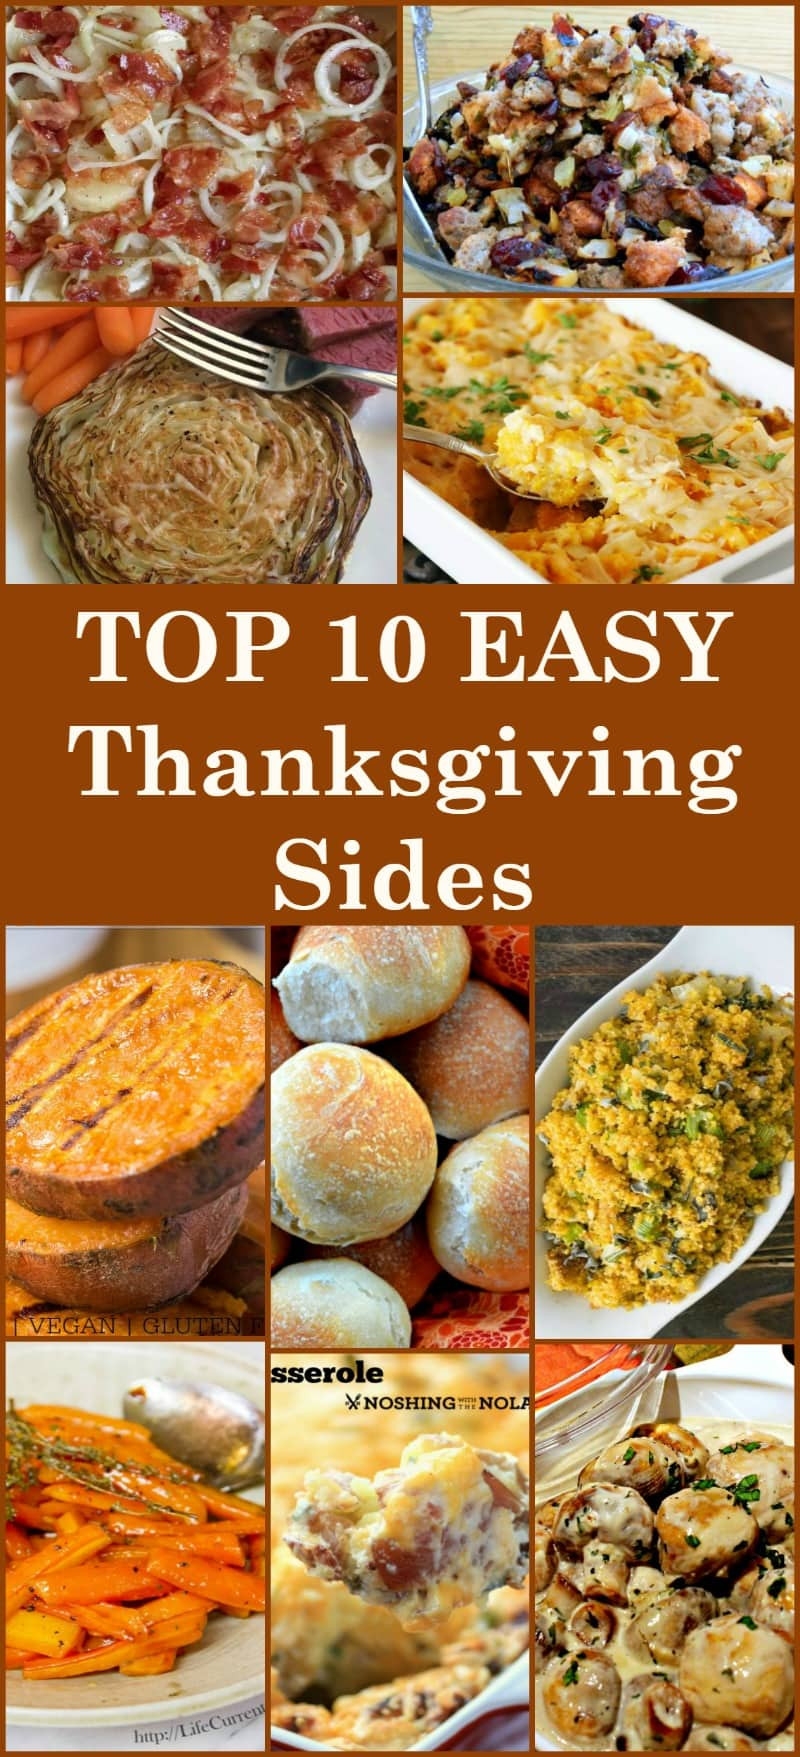 Best Thanksgiving Side Dishes
 The BEST Top 10 Thanksgiving Sides